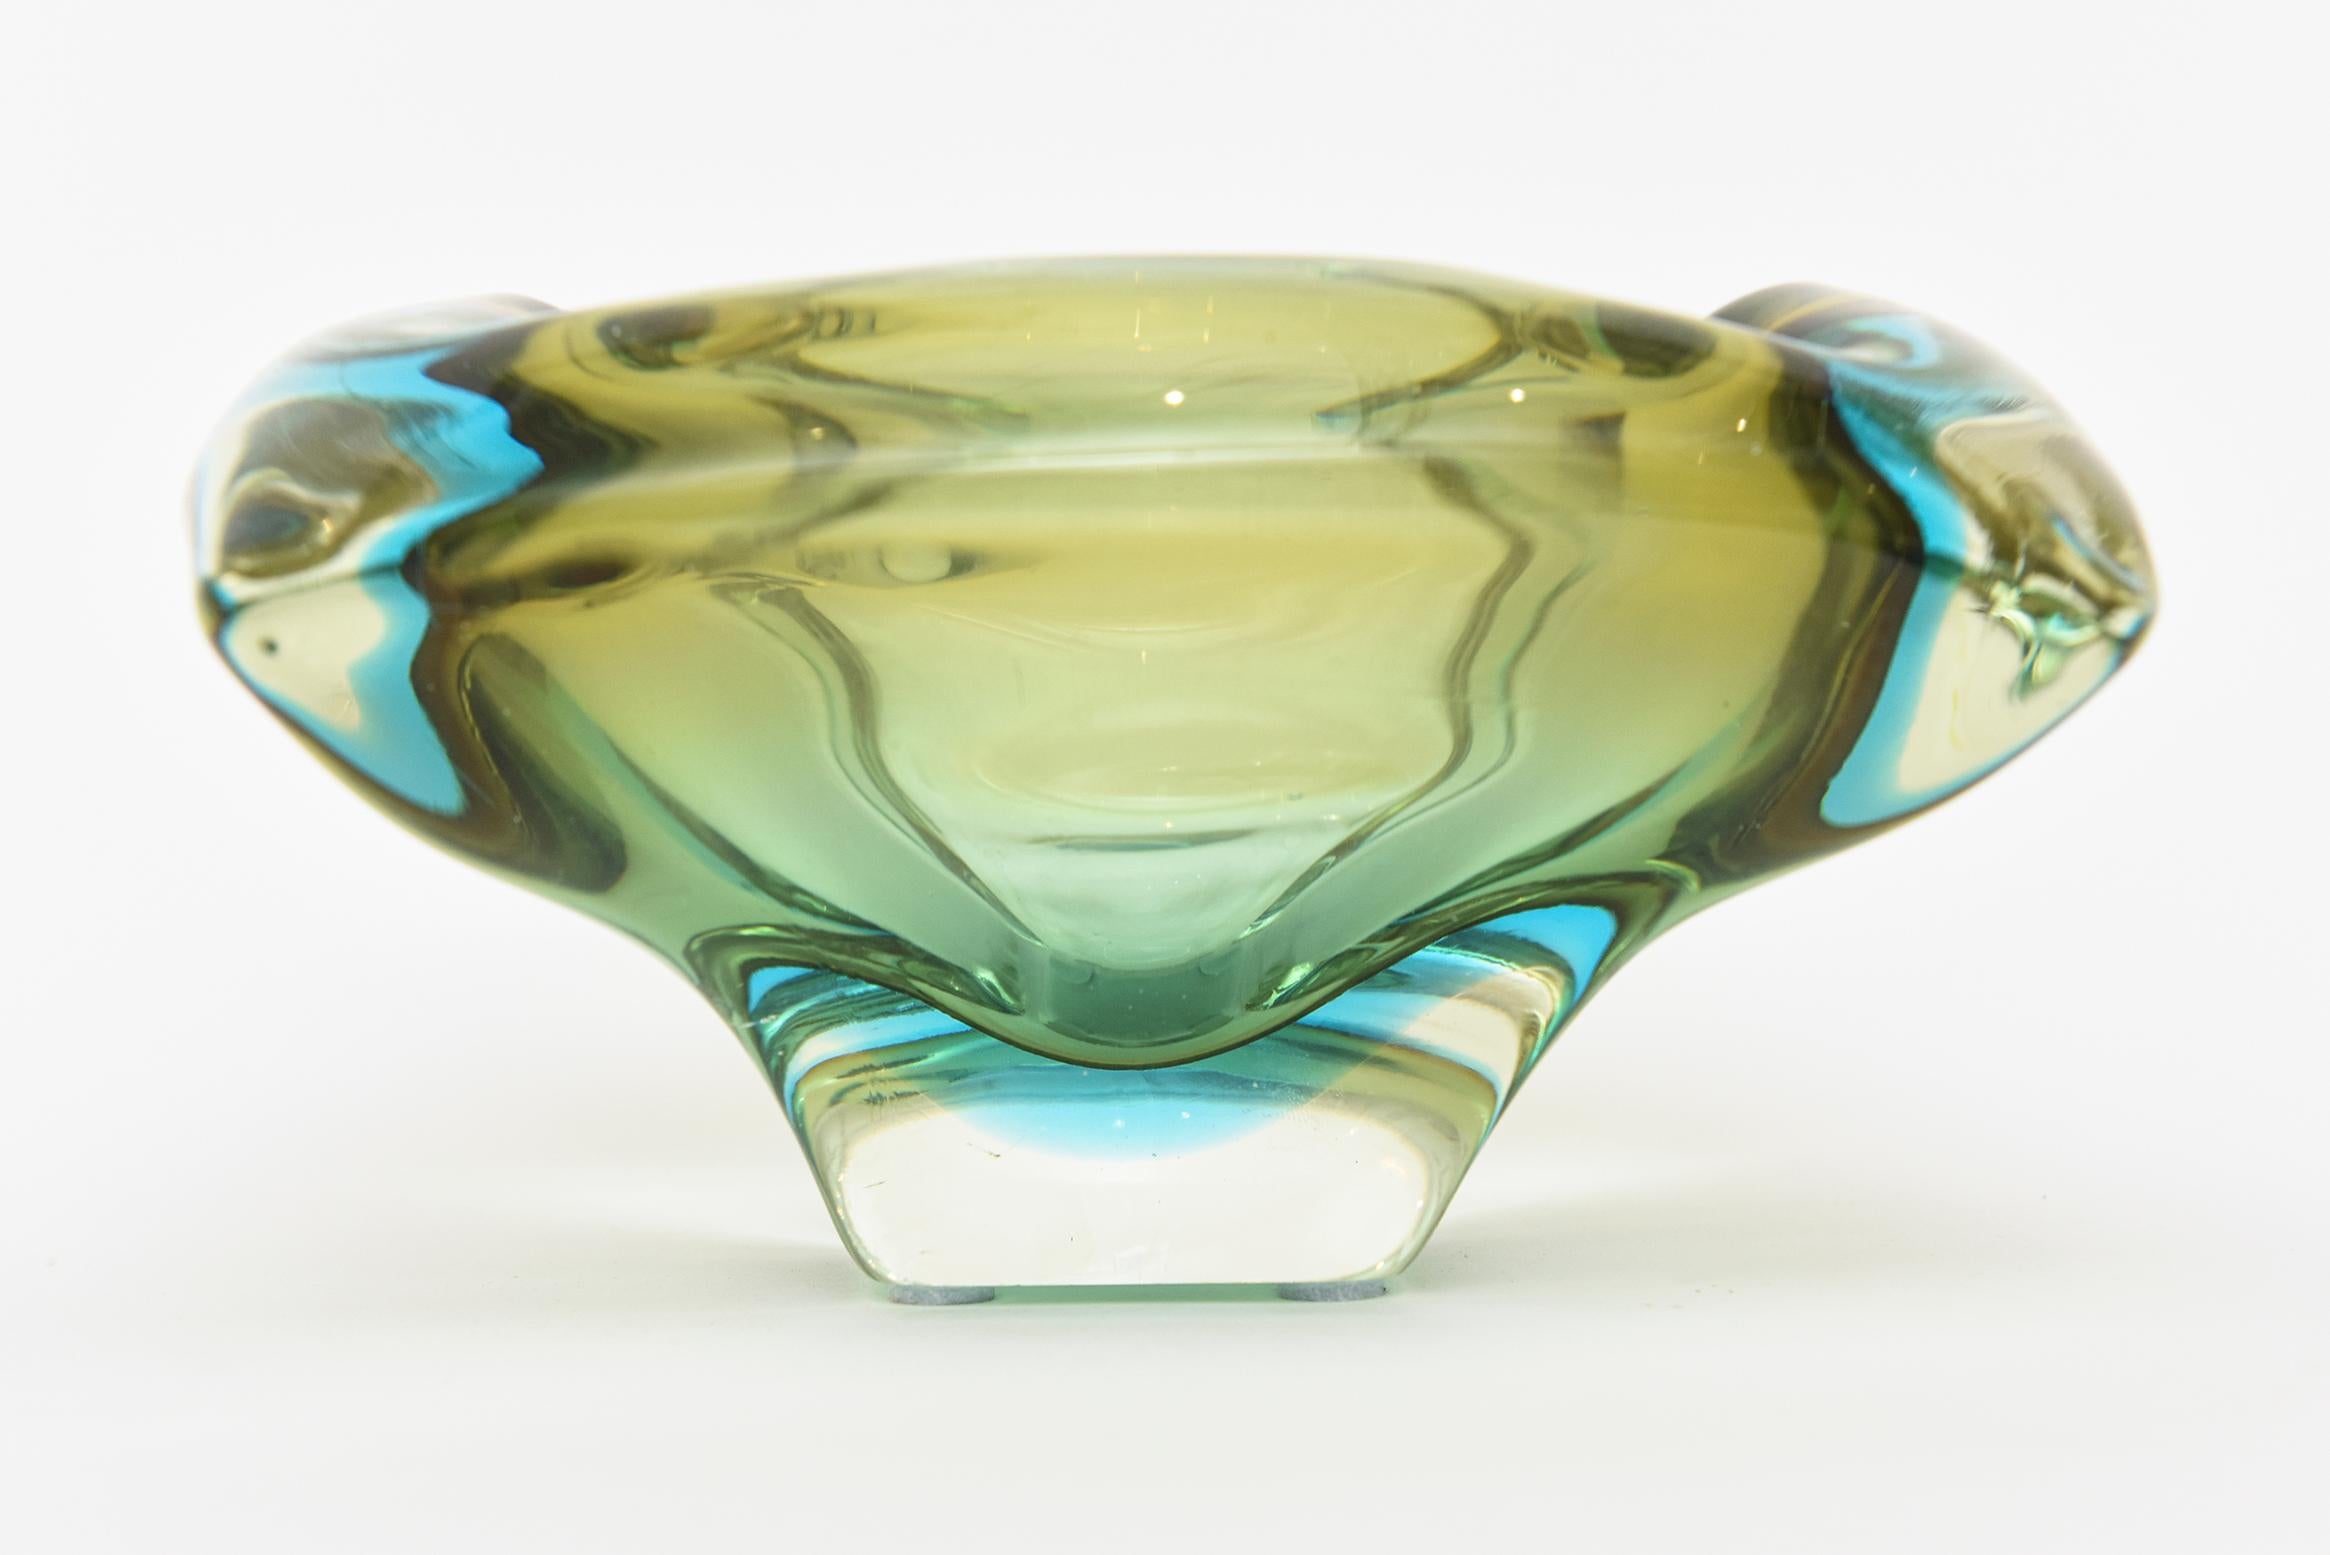 Modern Flavio Poli Murano Sommerso Turquoise and Green Glass Bowl / Ashtray Vintage For Sale